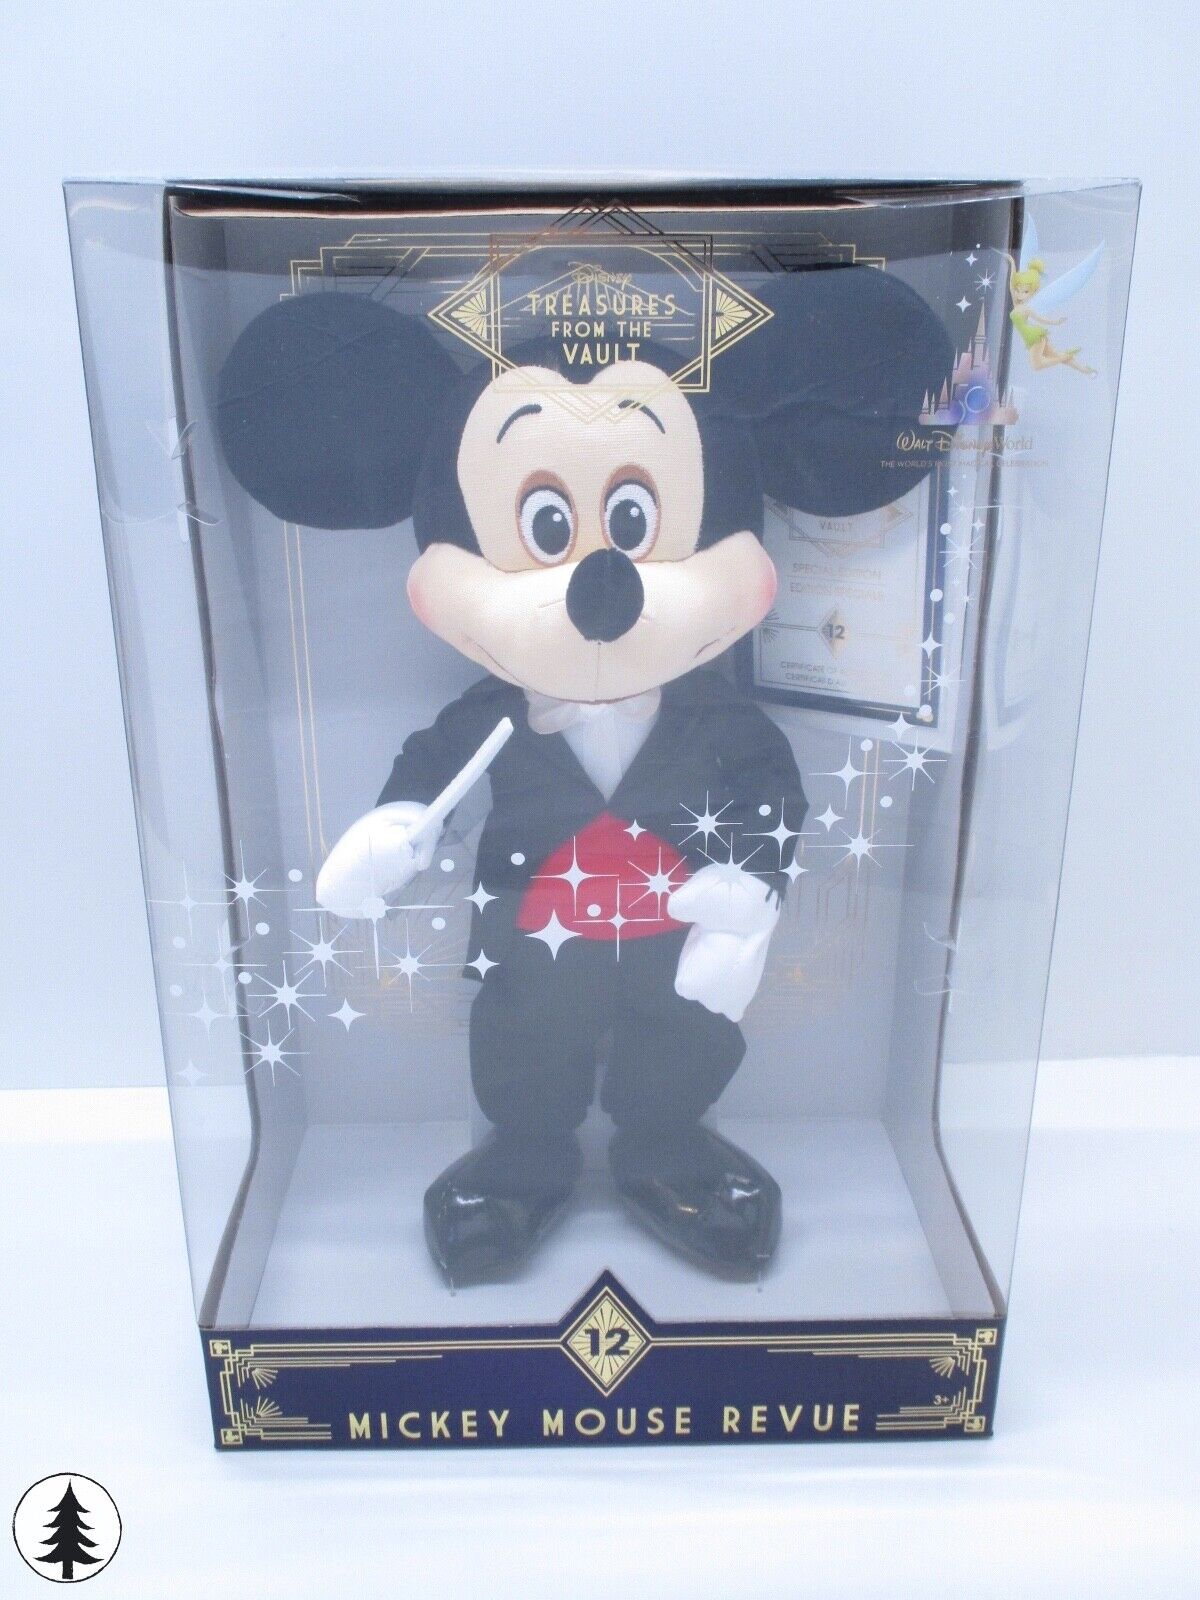 Disney Treasures From the Vault Mickey Mouse Revue Classic Animation Conductor